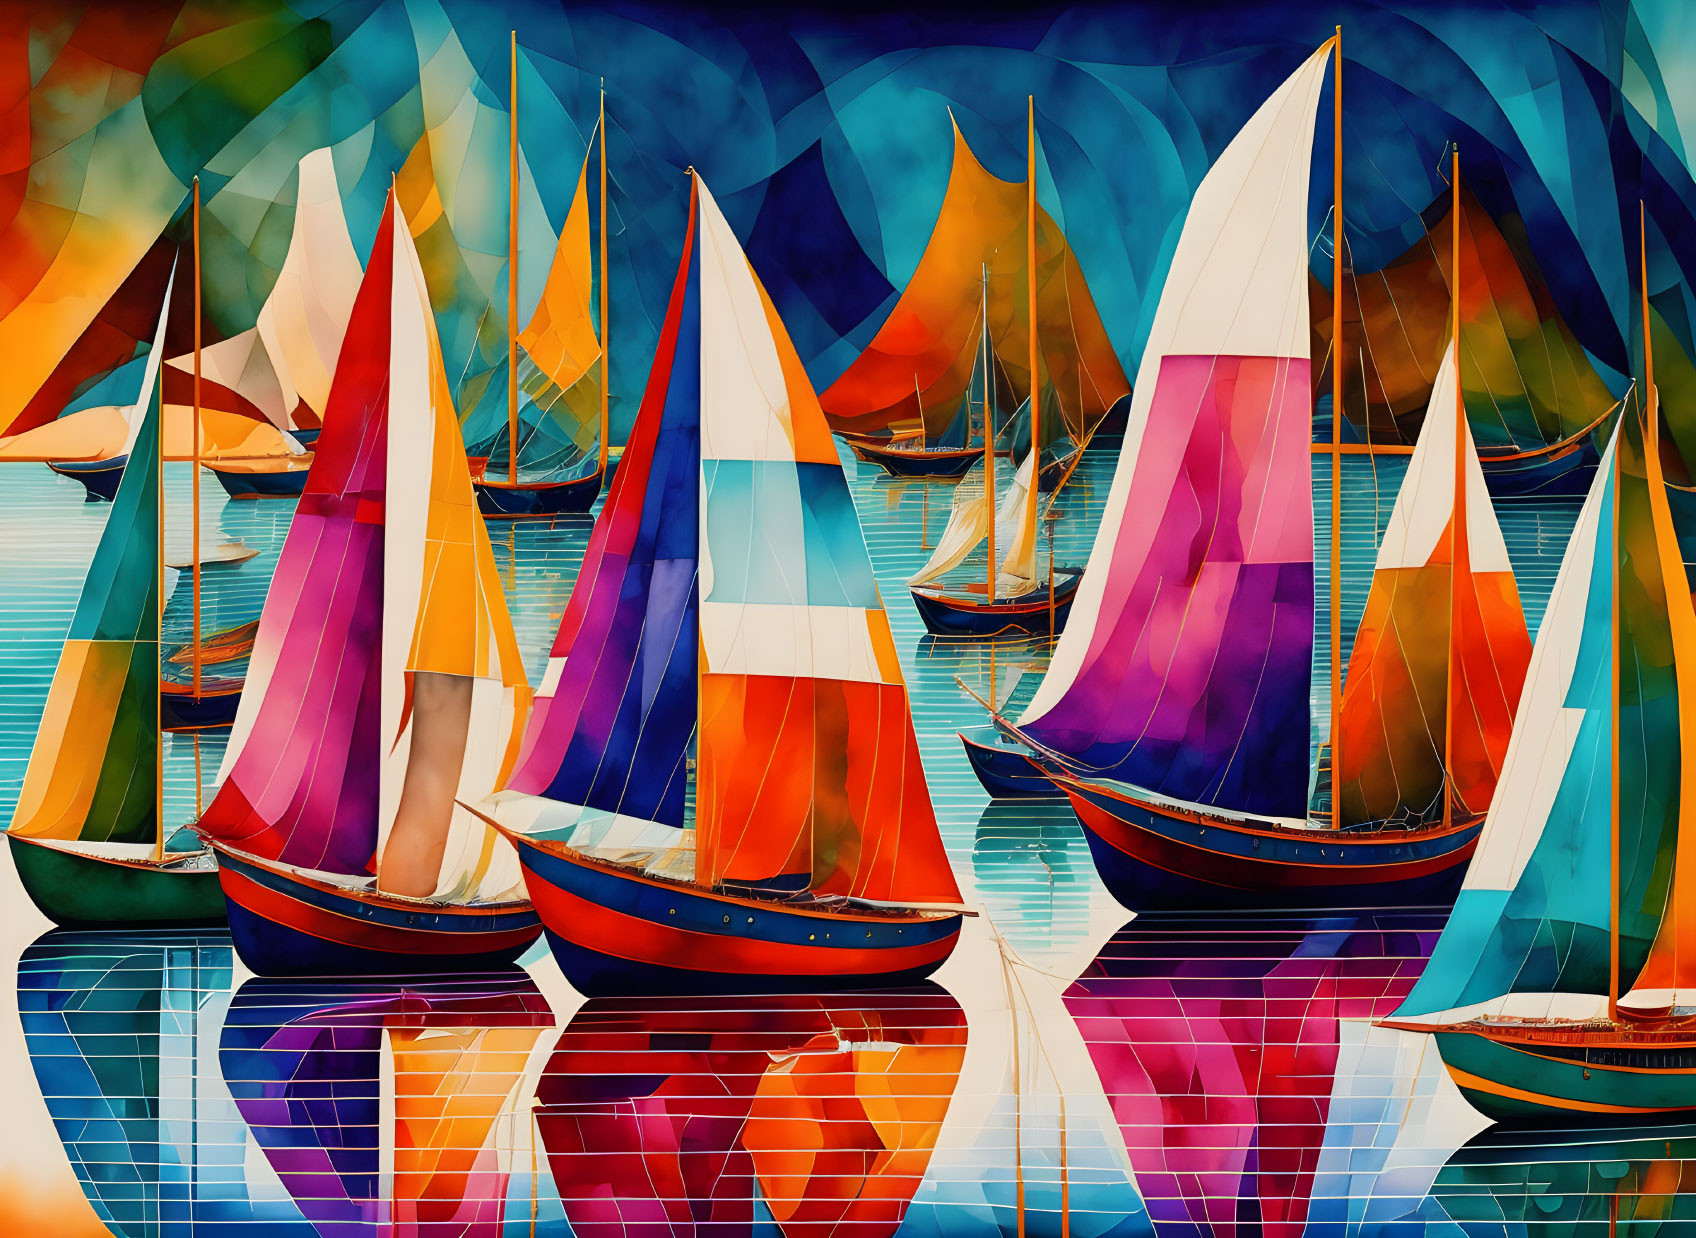 Colorful abstract painting of sailboats on geometric sea with dynamic sky